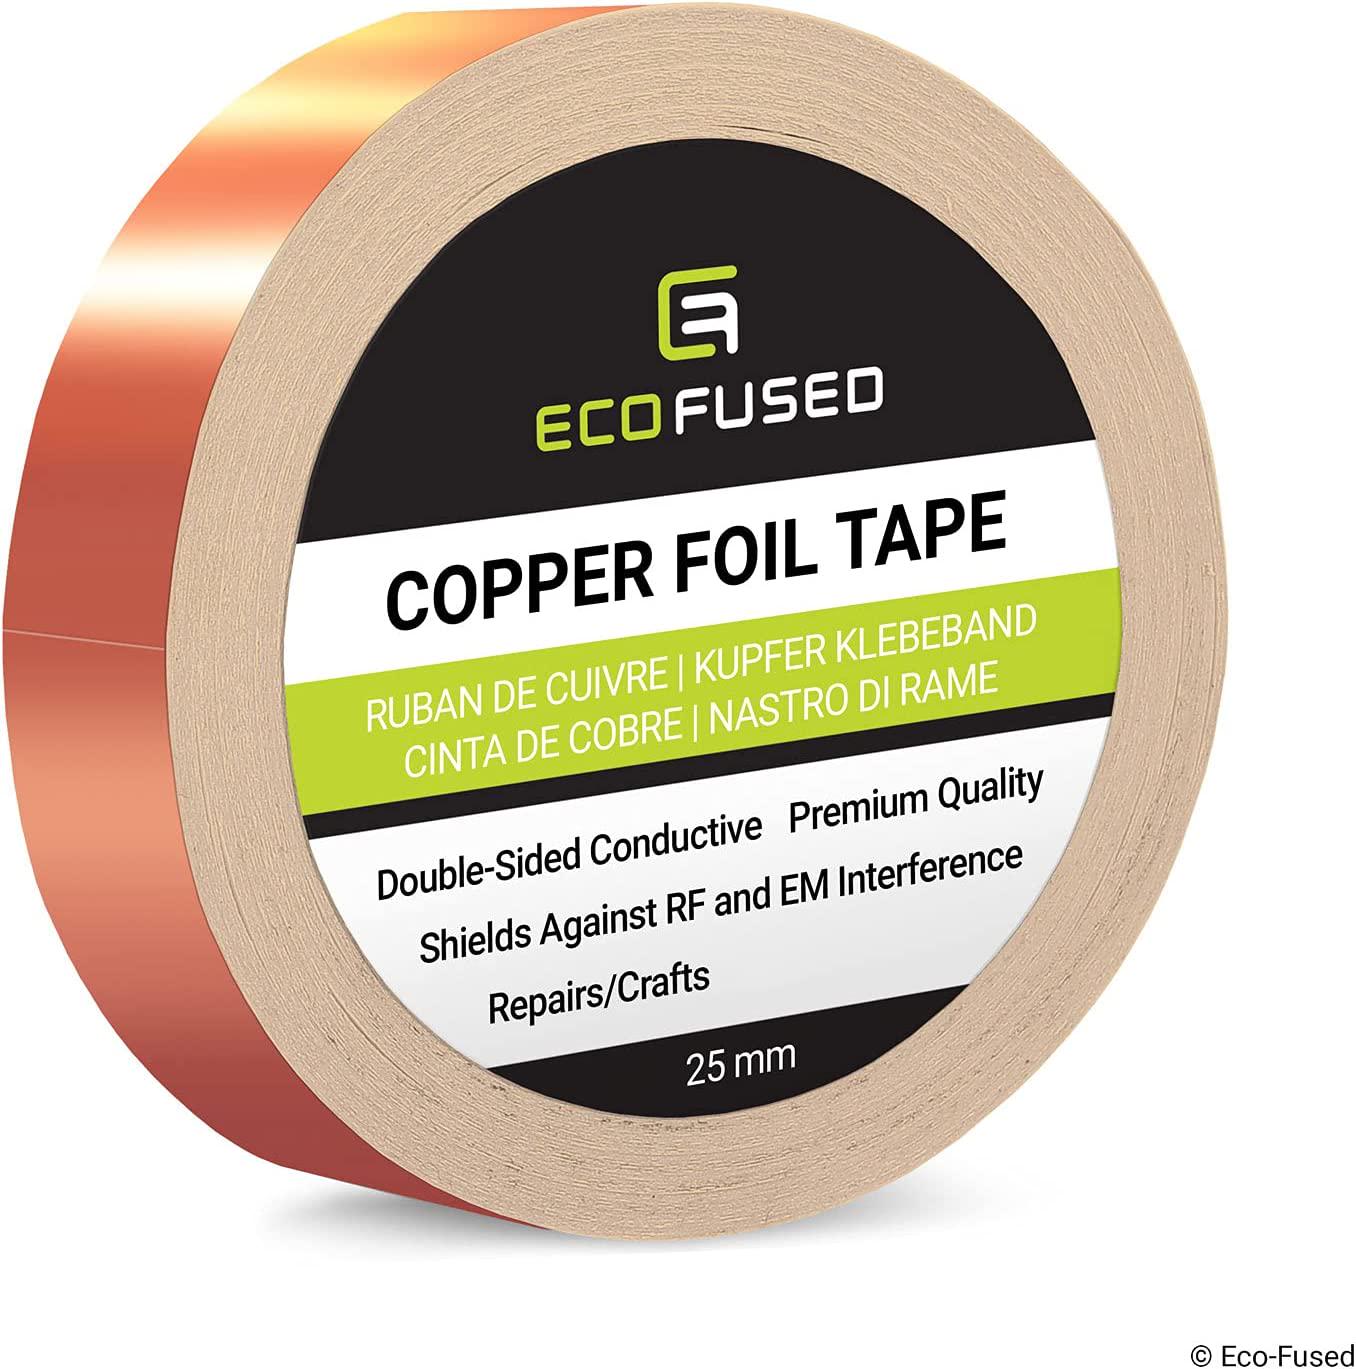 Eco-Fused, Eco-Fused Adhesive Copper Foil Tape - Double-Sided Conductive - EMI, Rf Shielding, Paper Circuits, Electrical Repairs, Grounding, 1 Roll - Copper Adhesive 1 inch / 25mm